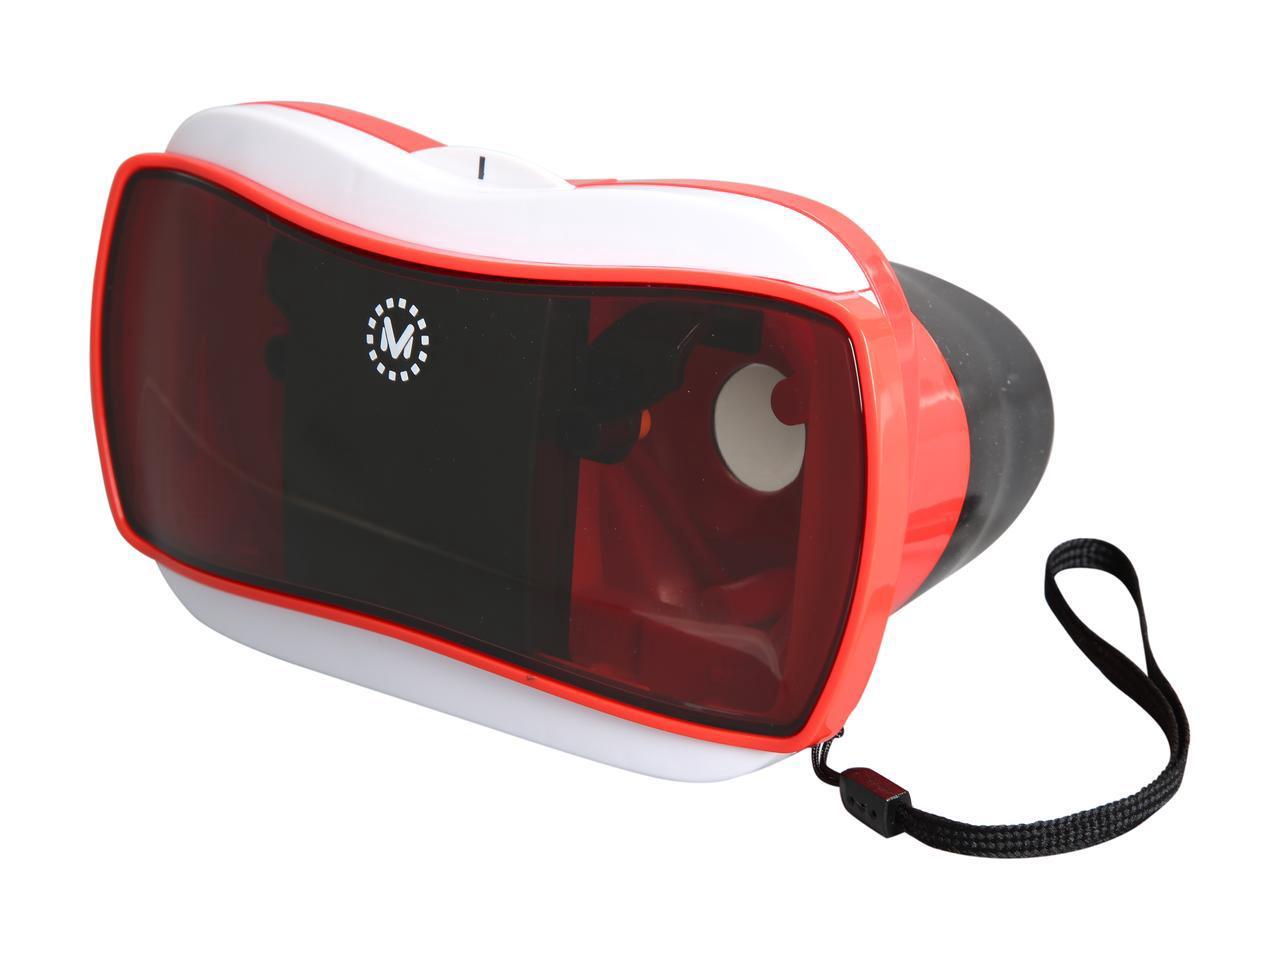 With the View-Master Virtual Reality starter pack ($18.99), you can view landmarks or vistas as if you were standing nearby, and check out everything around you just as if you were really there.